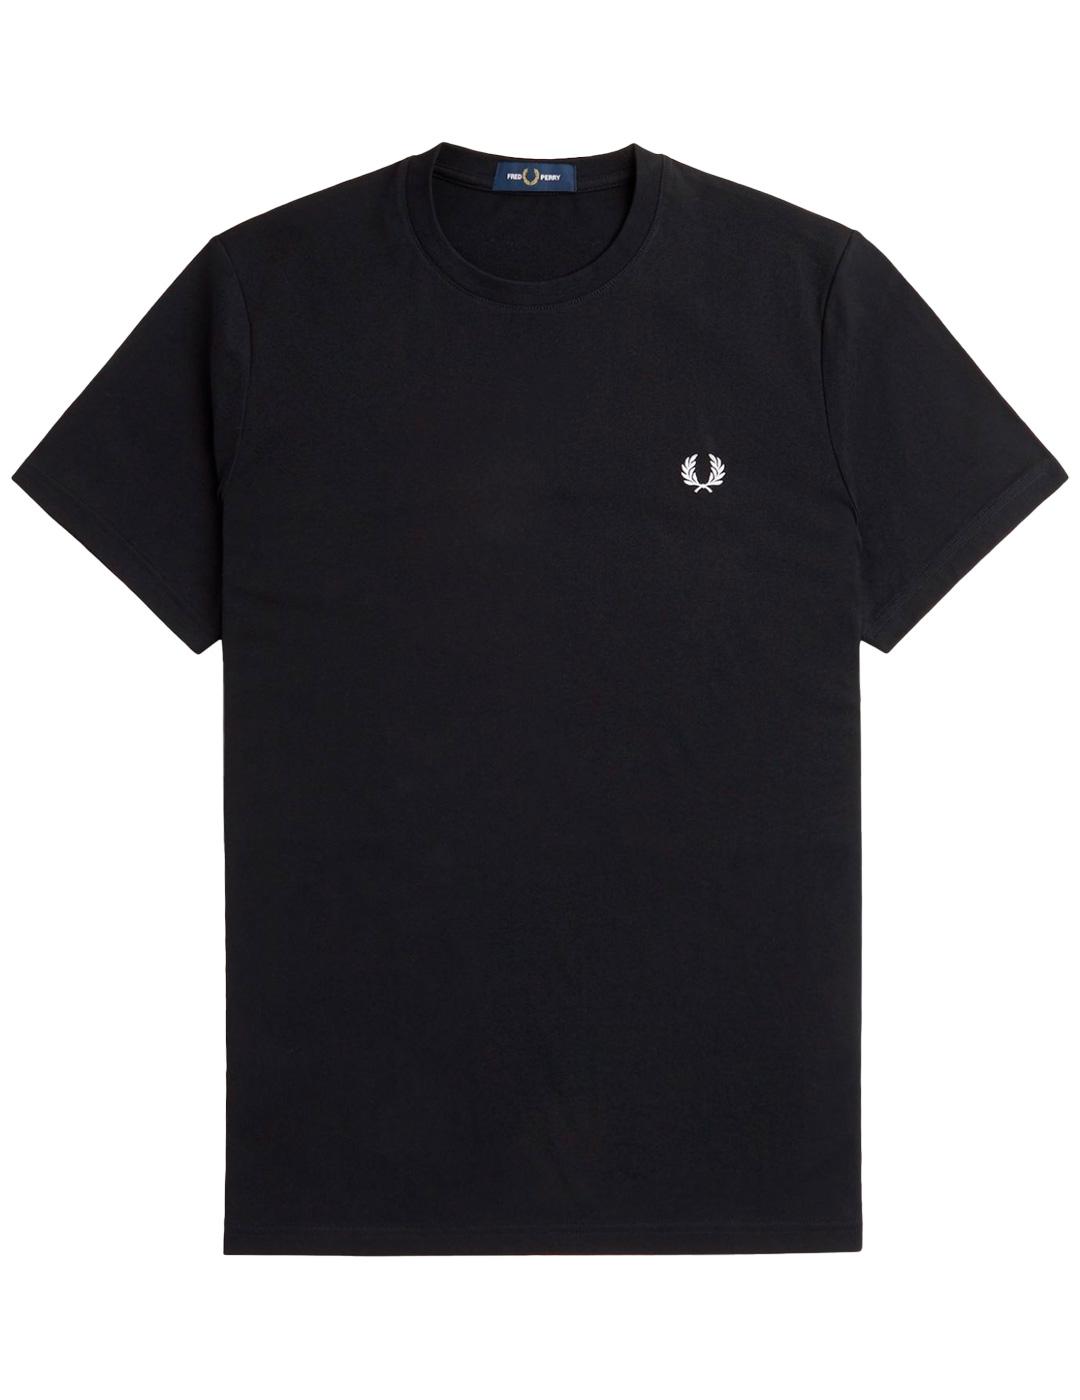 T-shirt Fred Perry Laurel Wreath Negro